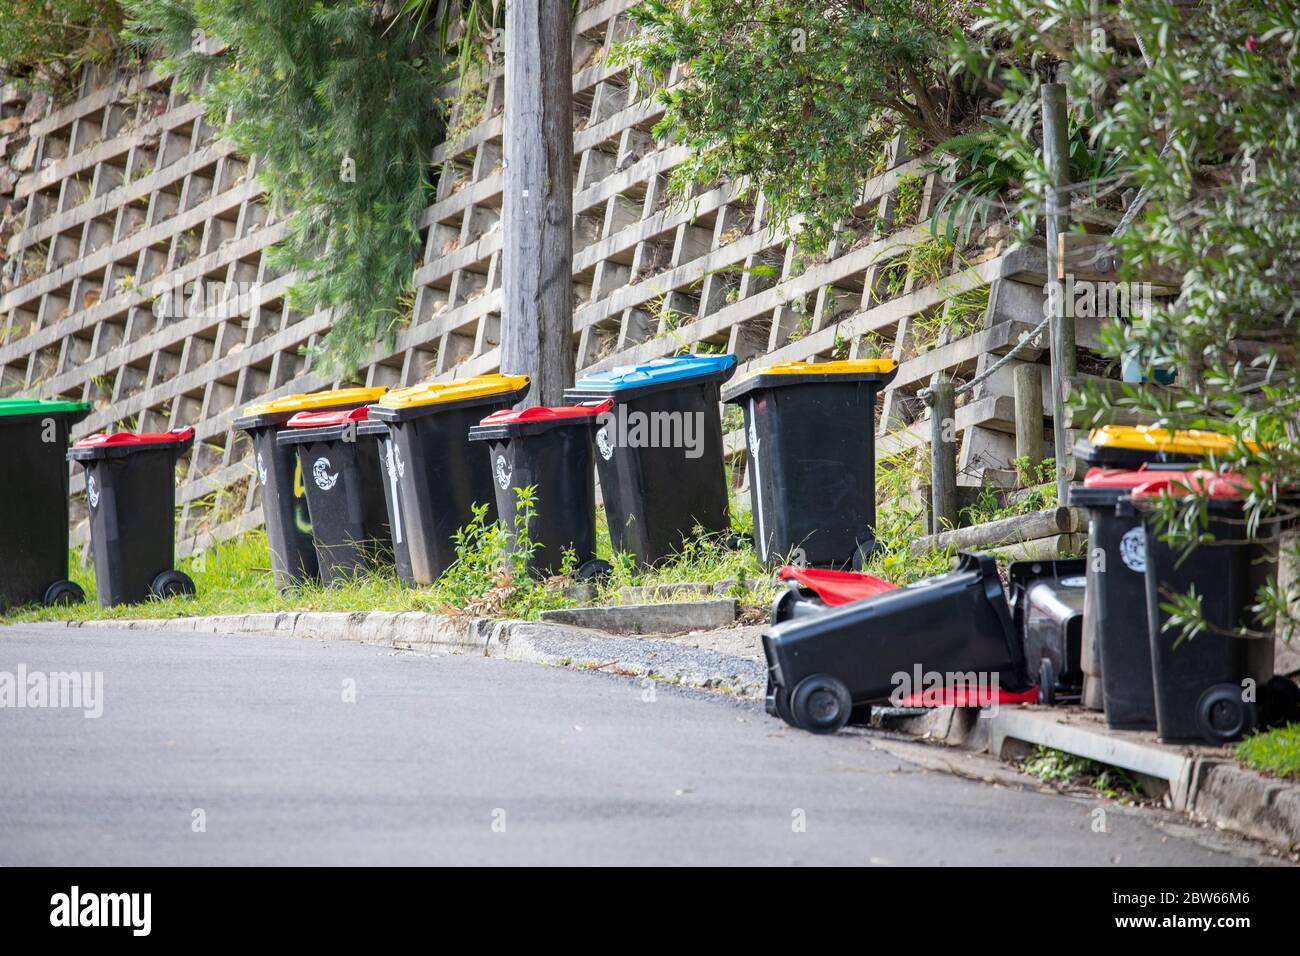 Household recycle Wheelie bins on a Sydney street after being emptied by council garbage collection service,Australia Stock Photo